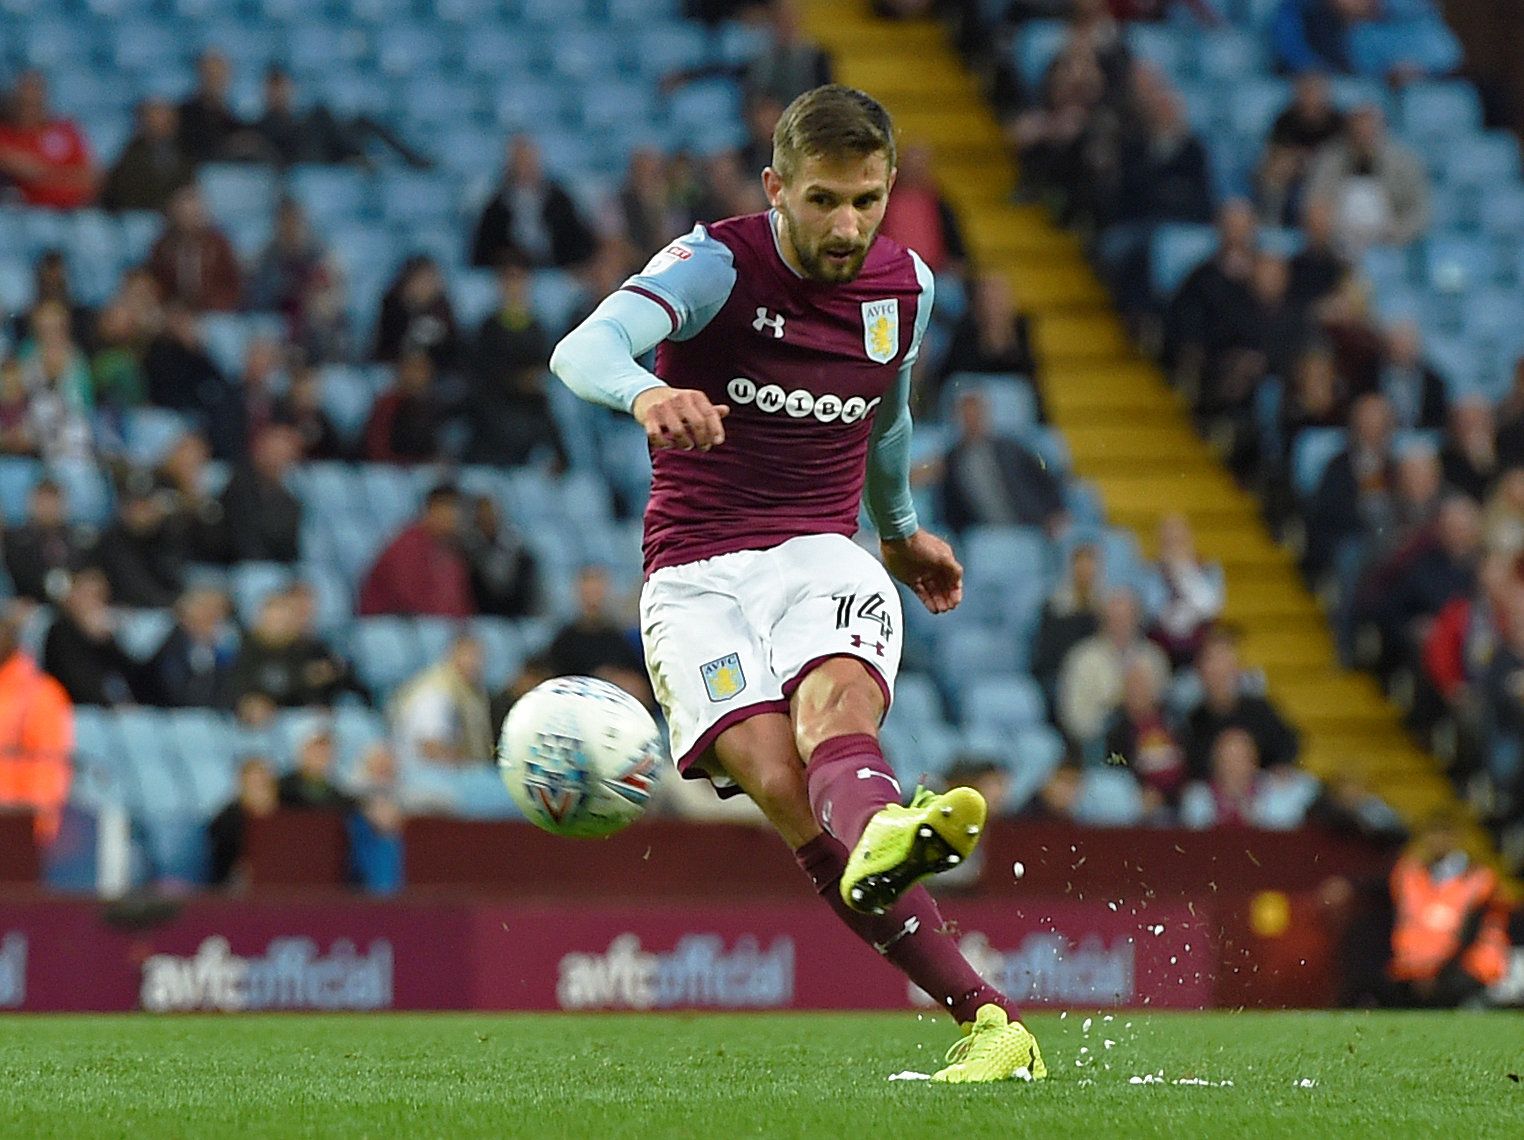 Soccer Football - Championship - Aston Villa vs Nottingham Forest - Villa Park, Birmingham, Britain - September 23, 2017  Aston Villa's Conor Hourihane scores their second goal   Action Images/Alan Walter  EDITORIAL USE ONLY. No use with unauthorized audio, video, data, fixture lists, club/league logos or 